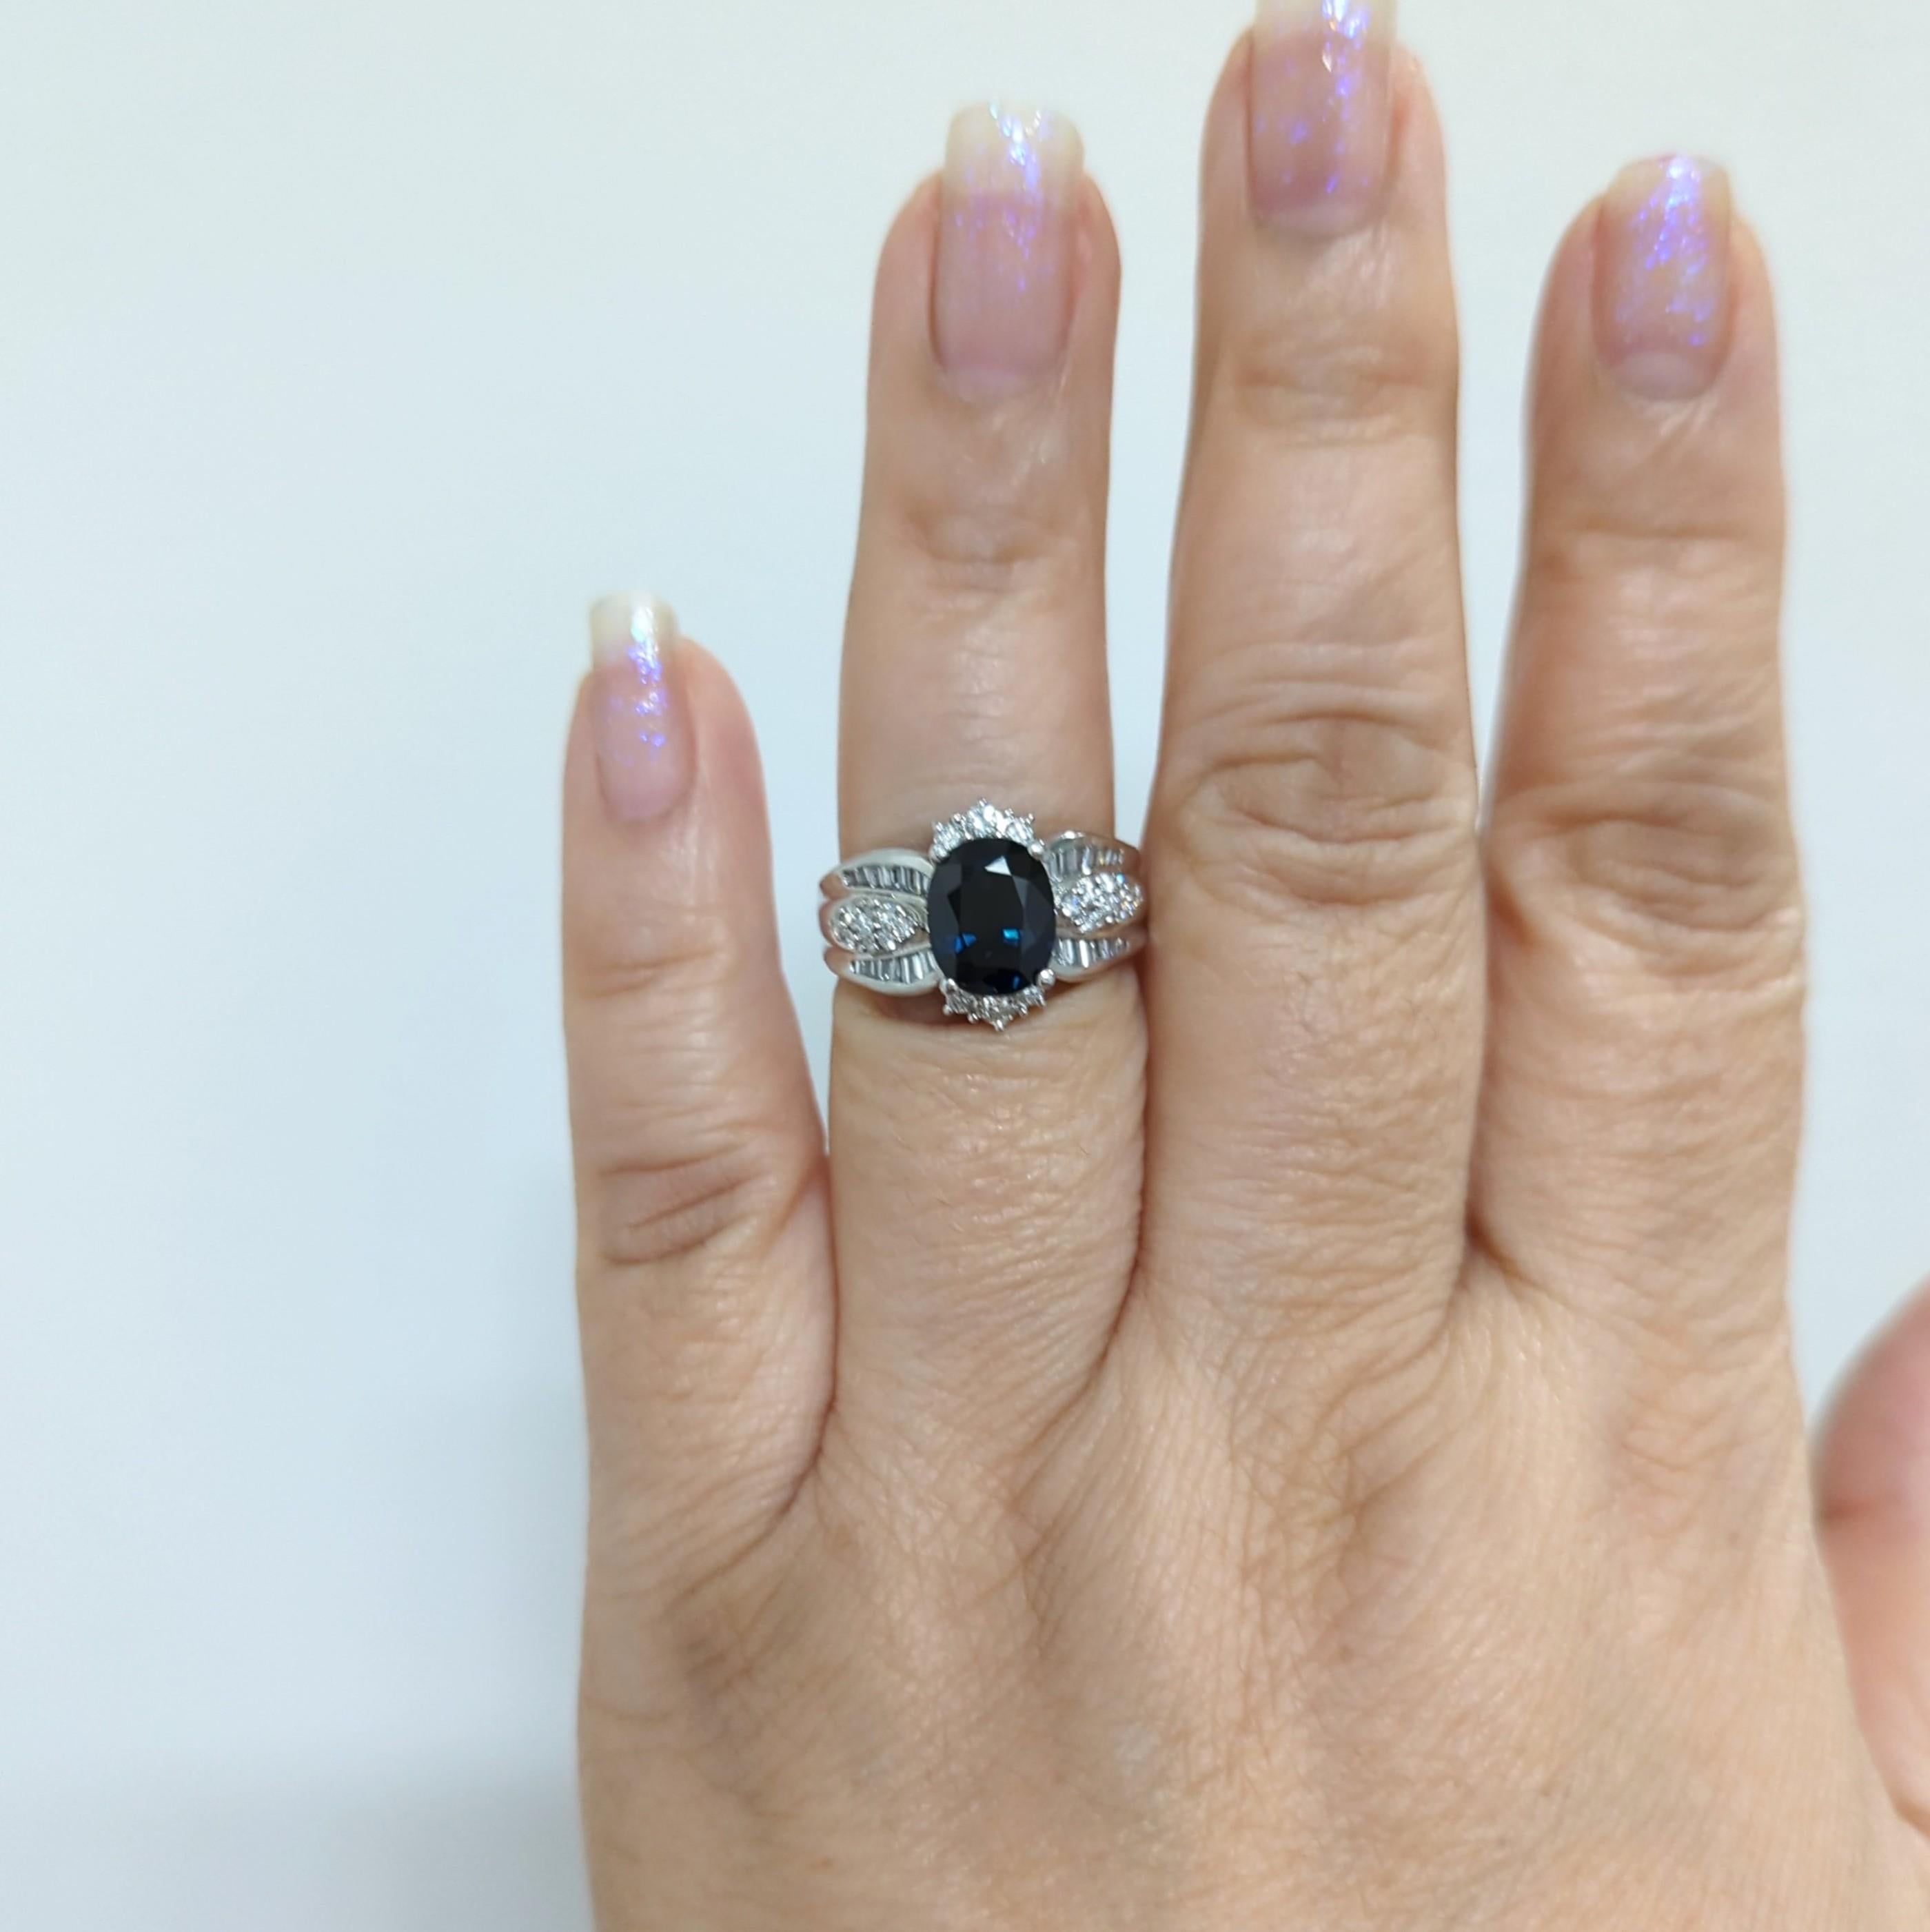 Beautiful 3.21 ct. blue sapphire oval with 0.80 ct. good quality white diamond rounds and baguettes.  Handmade in platinum.  Ring size 7.  